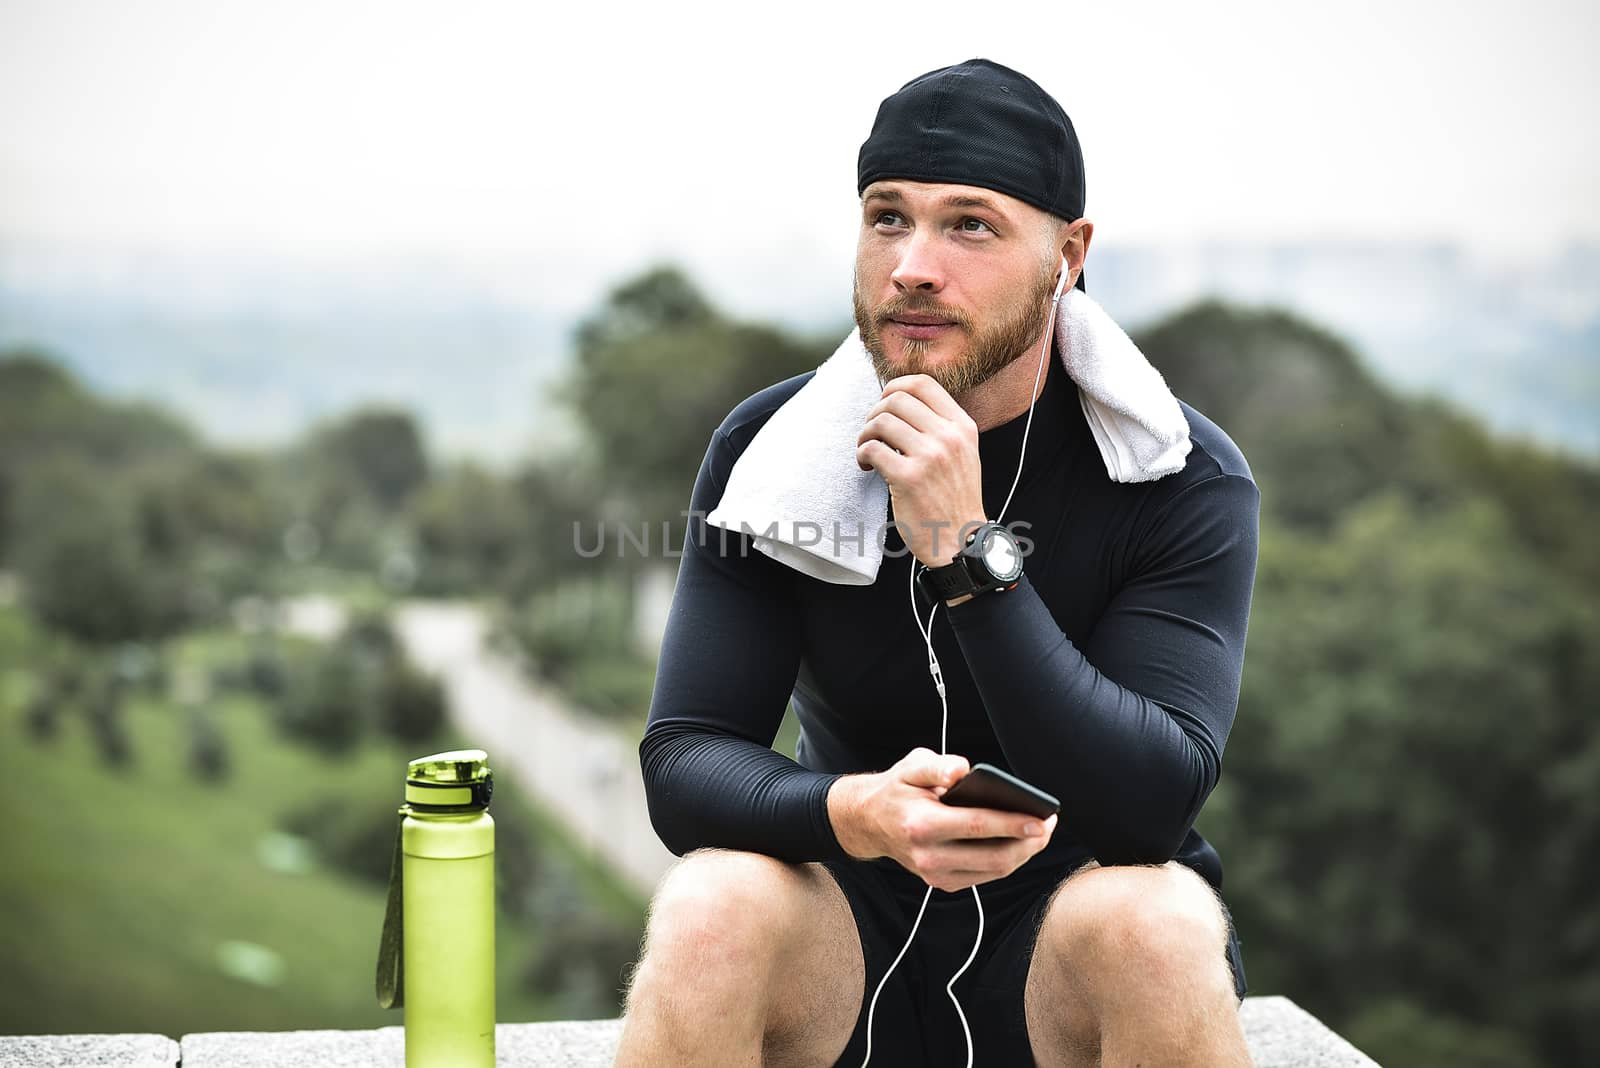 Muscular bearded athlete with towel checking burned calories on smartphone after good workout session on city park.